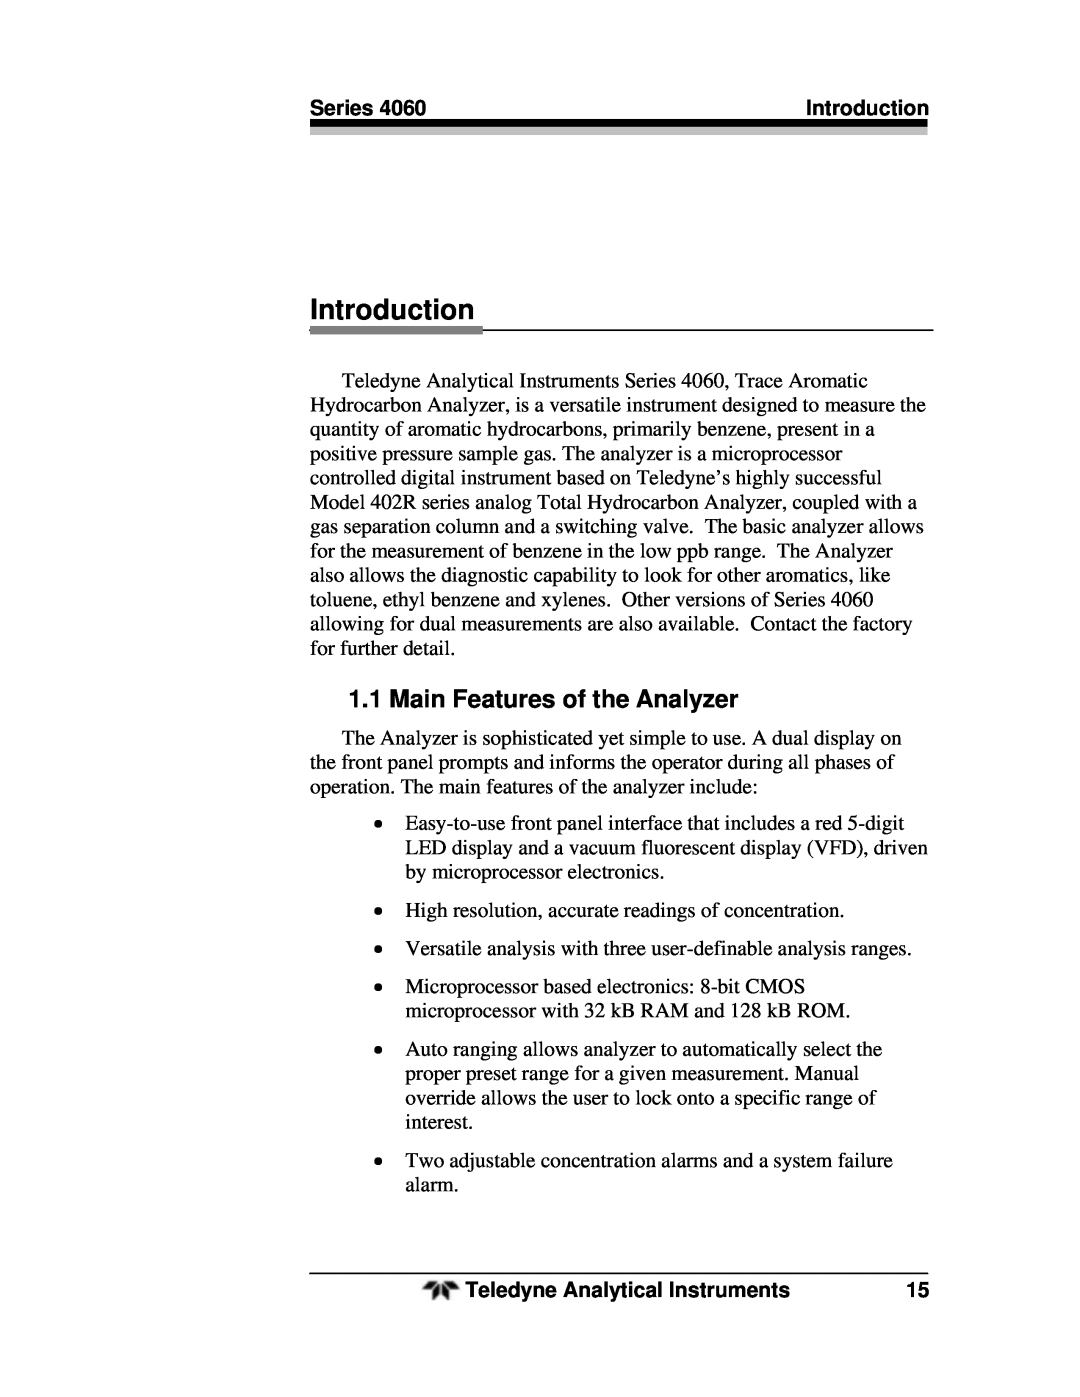 Teledyne 4060 manual Introduction, Main Features of the Analyzer 